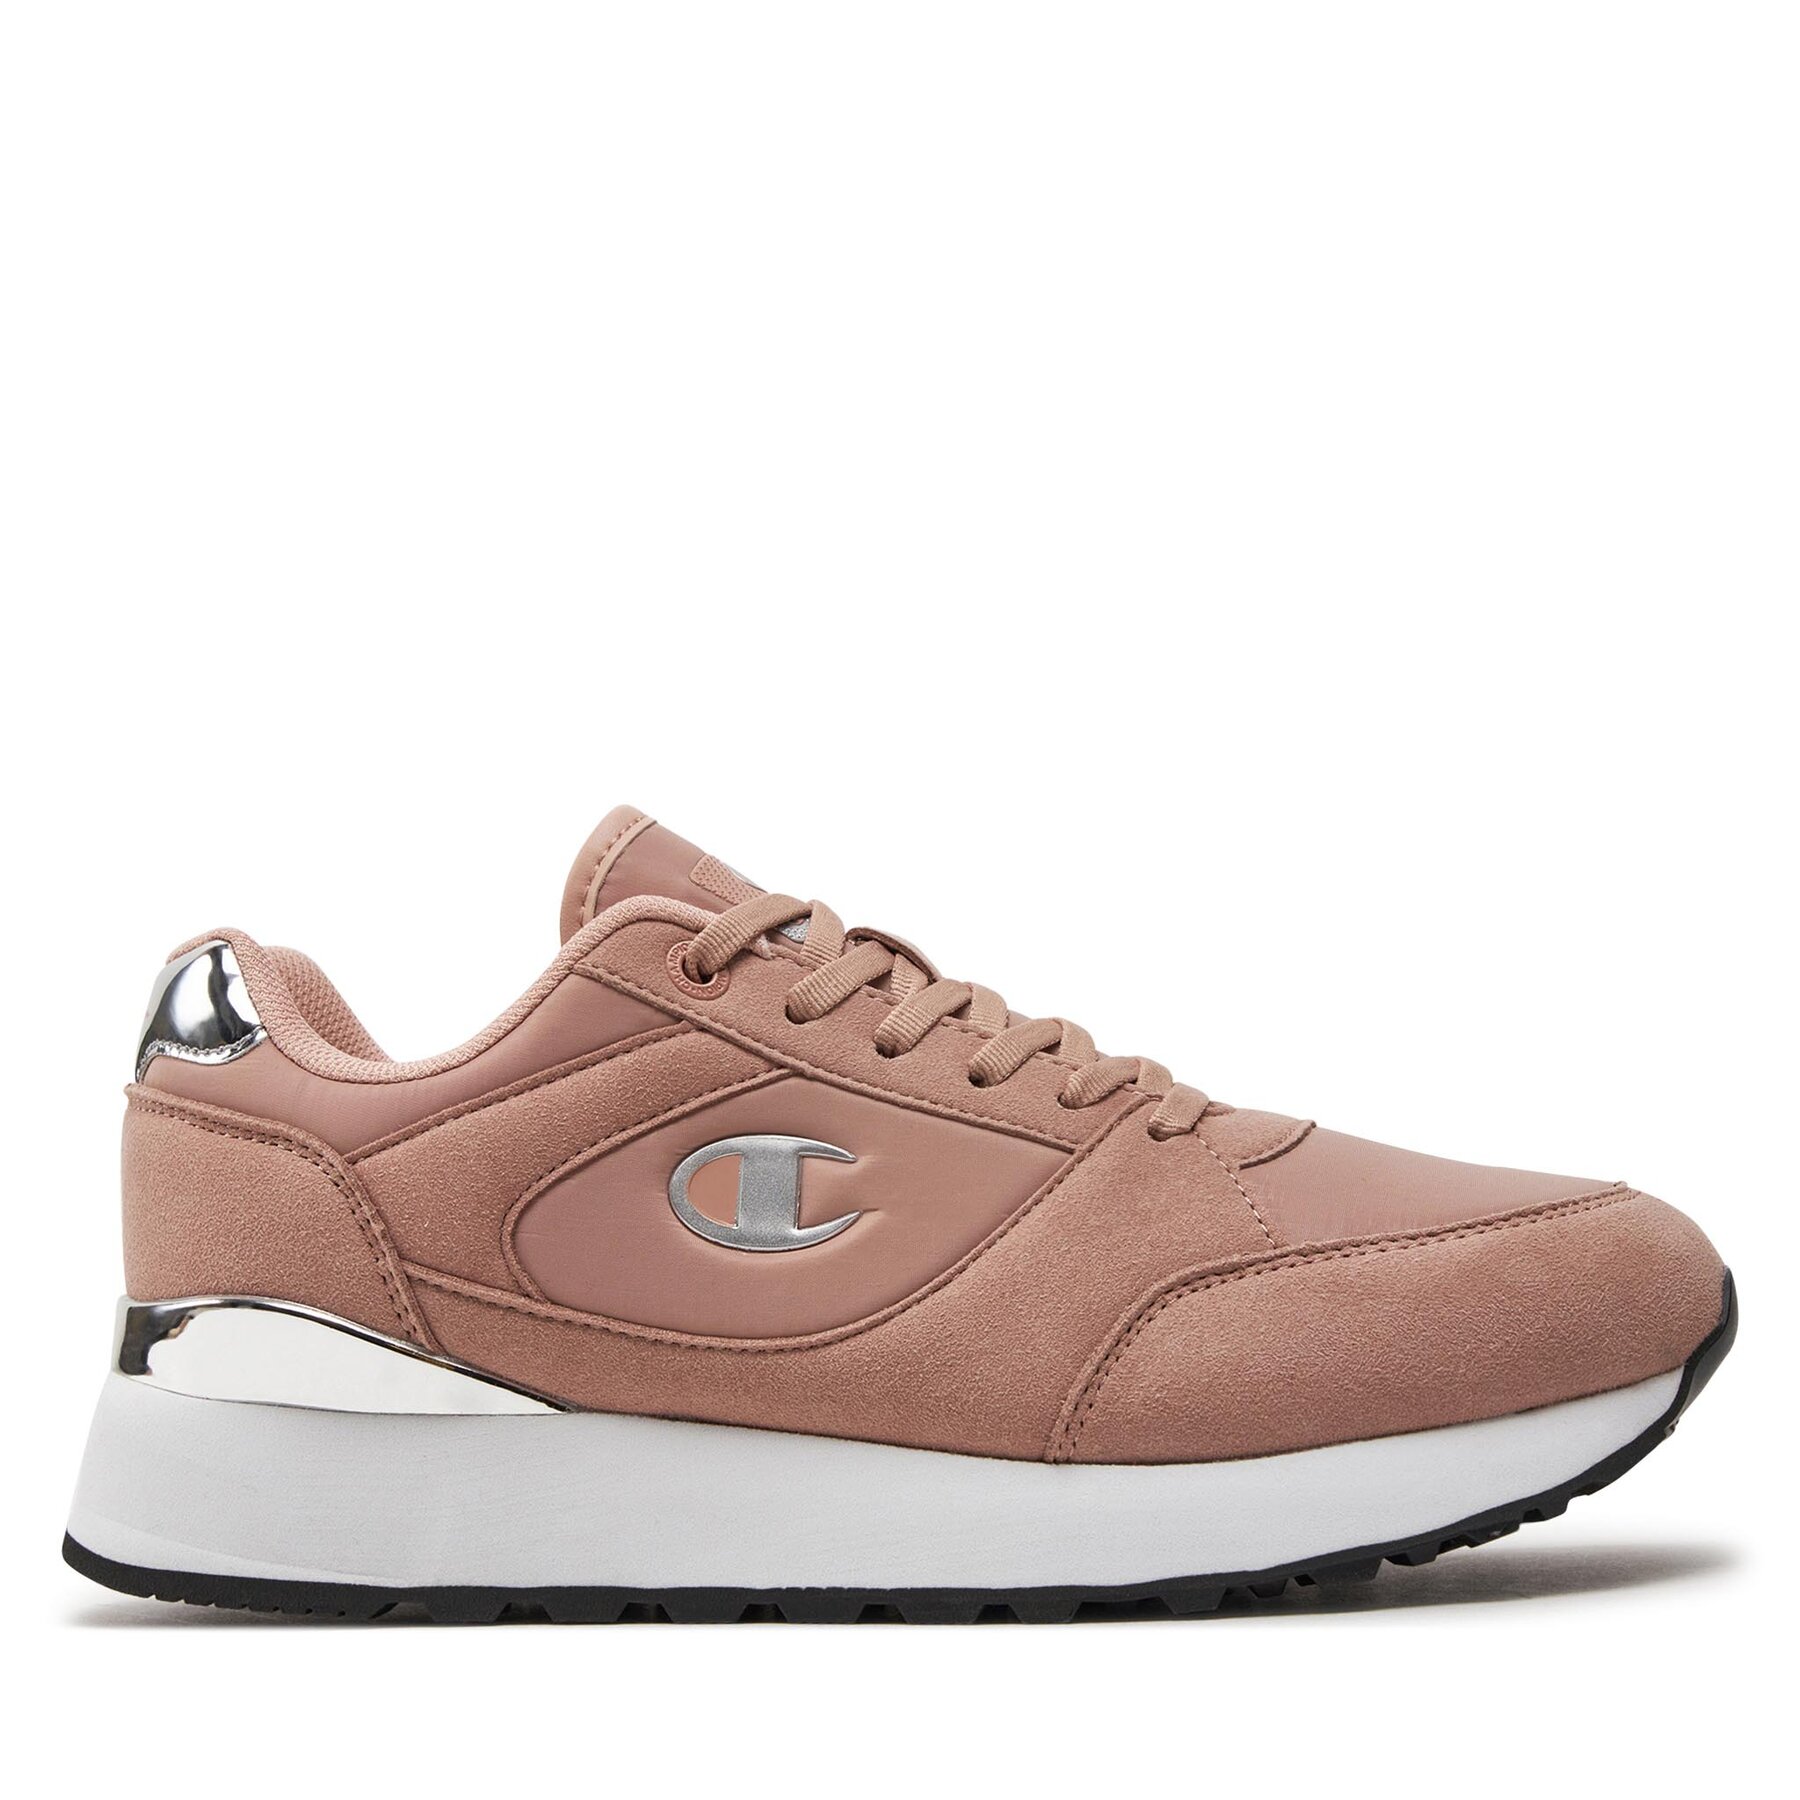 Sneakers Champion Rr Champ Plat Ny Low Cut Shoe S11685-CHA-PS127 Dusty Rose von Champion